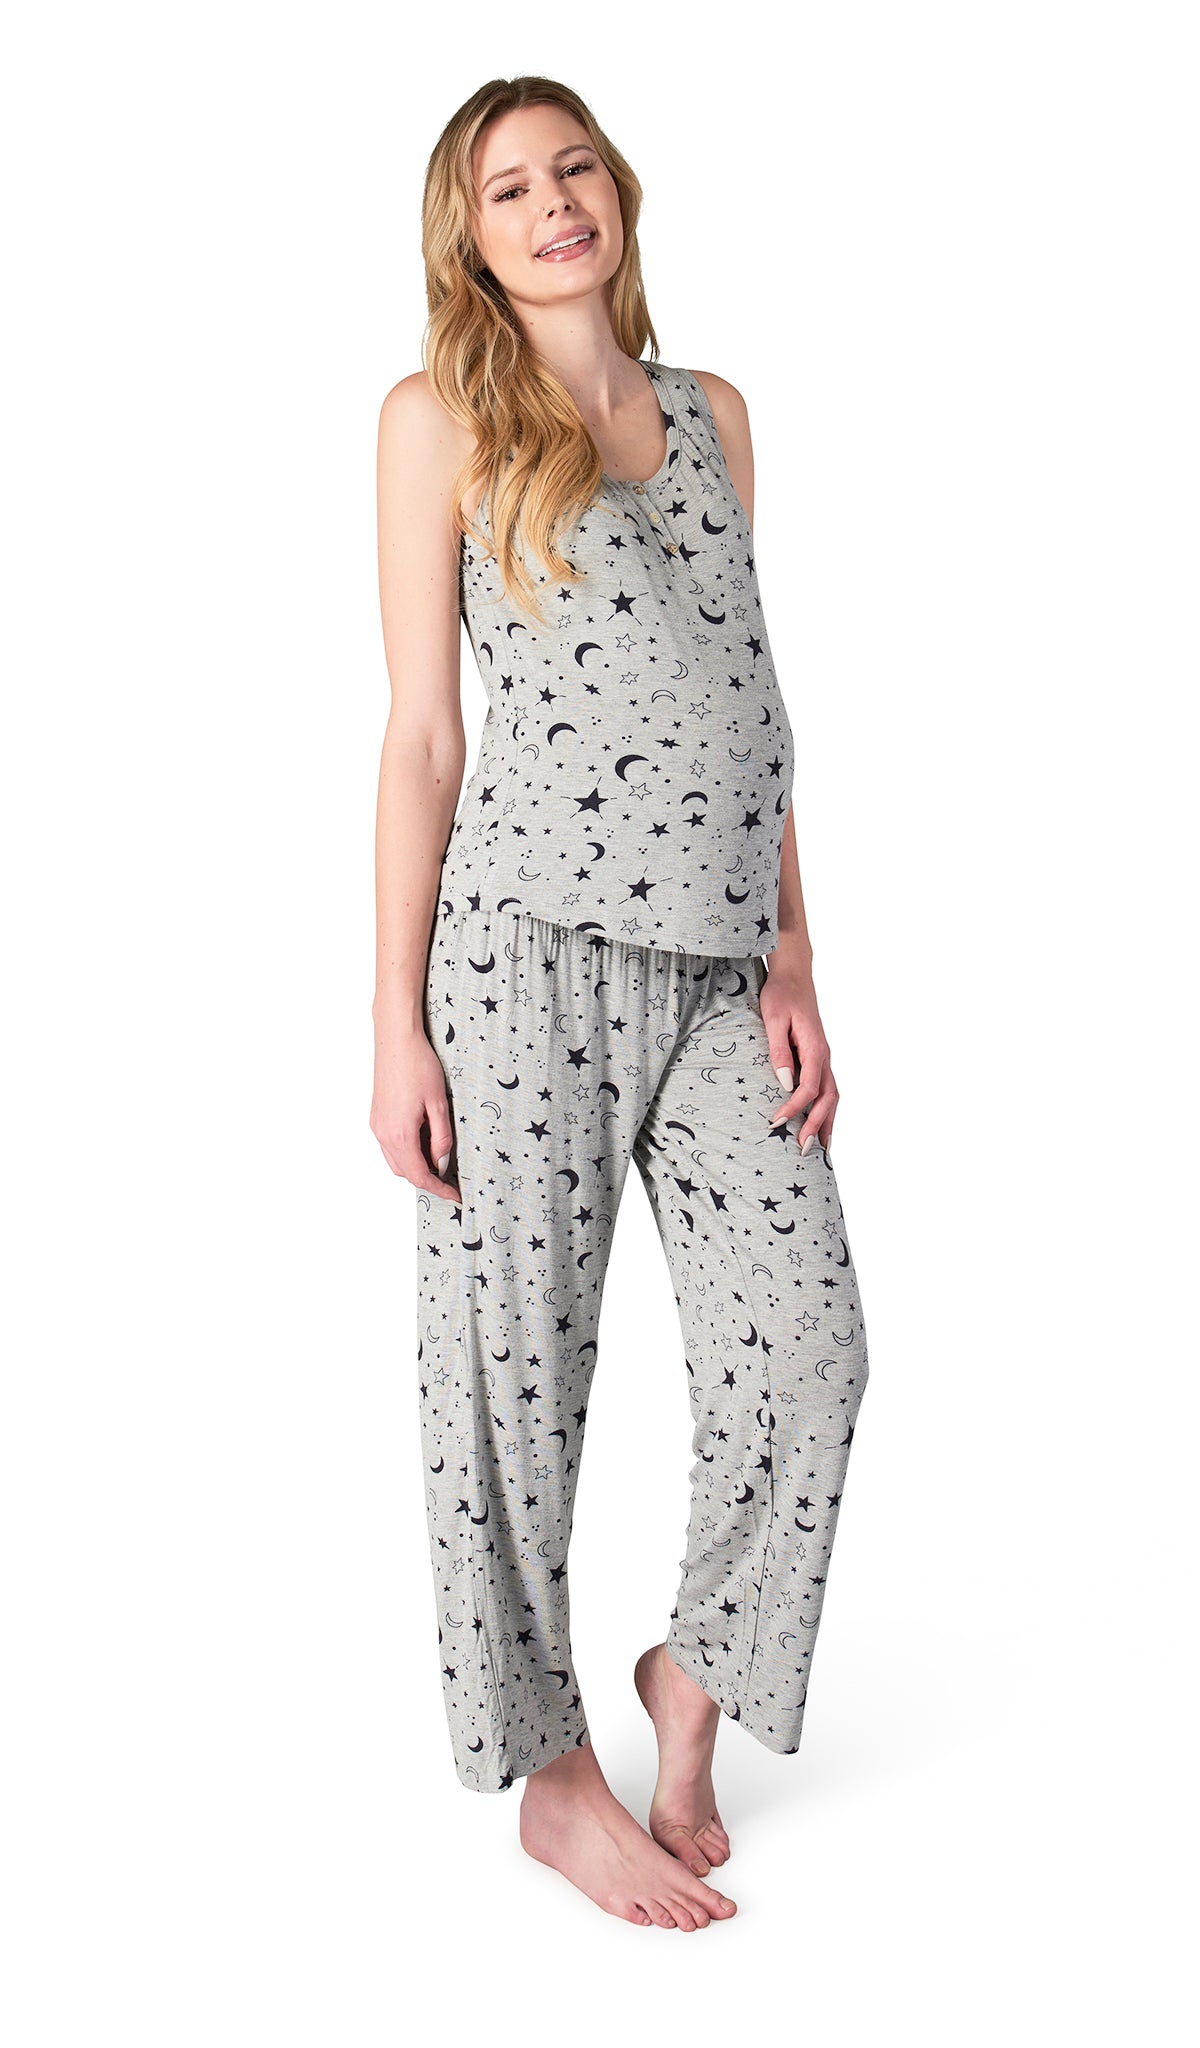 Twinkle Night Joy 2-Piece Set. Pregnant woman wearing button front placket tank top and pant.